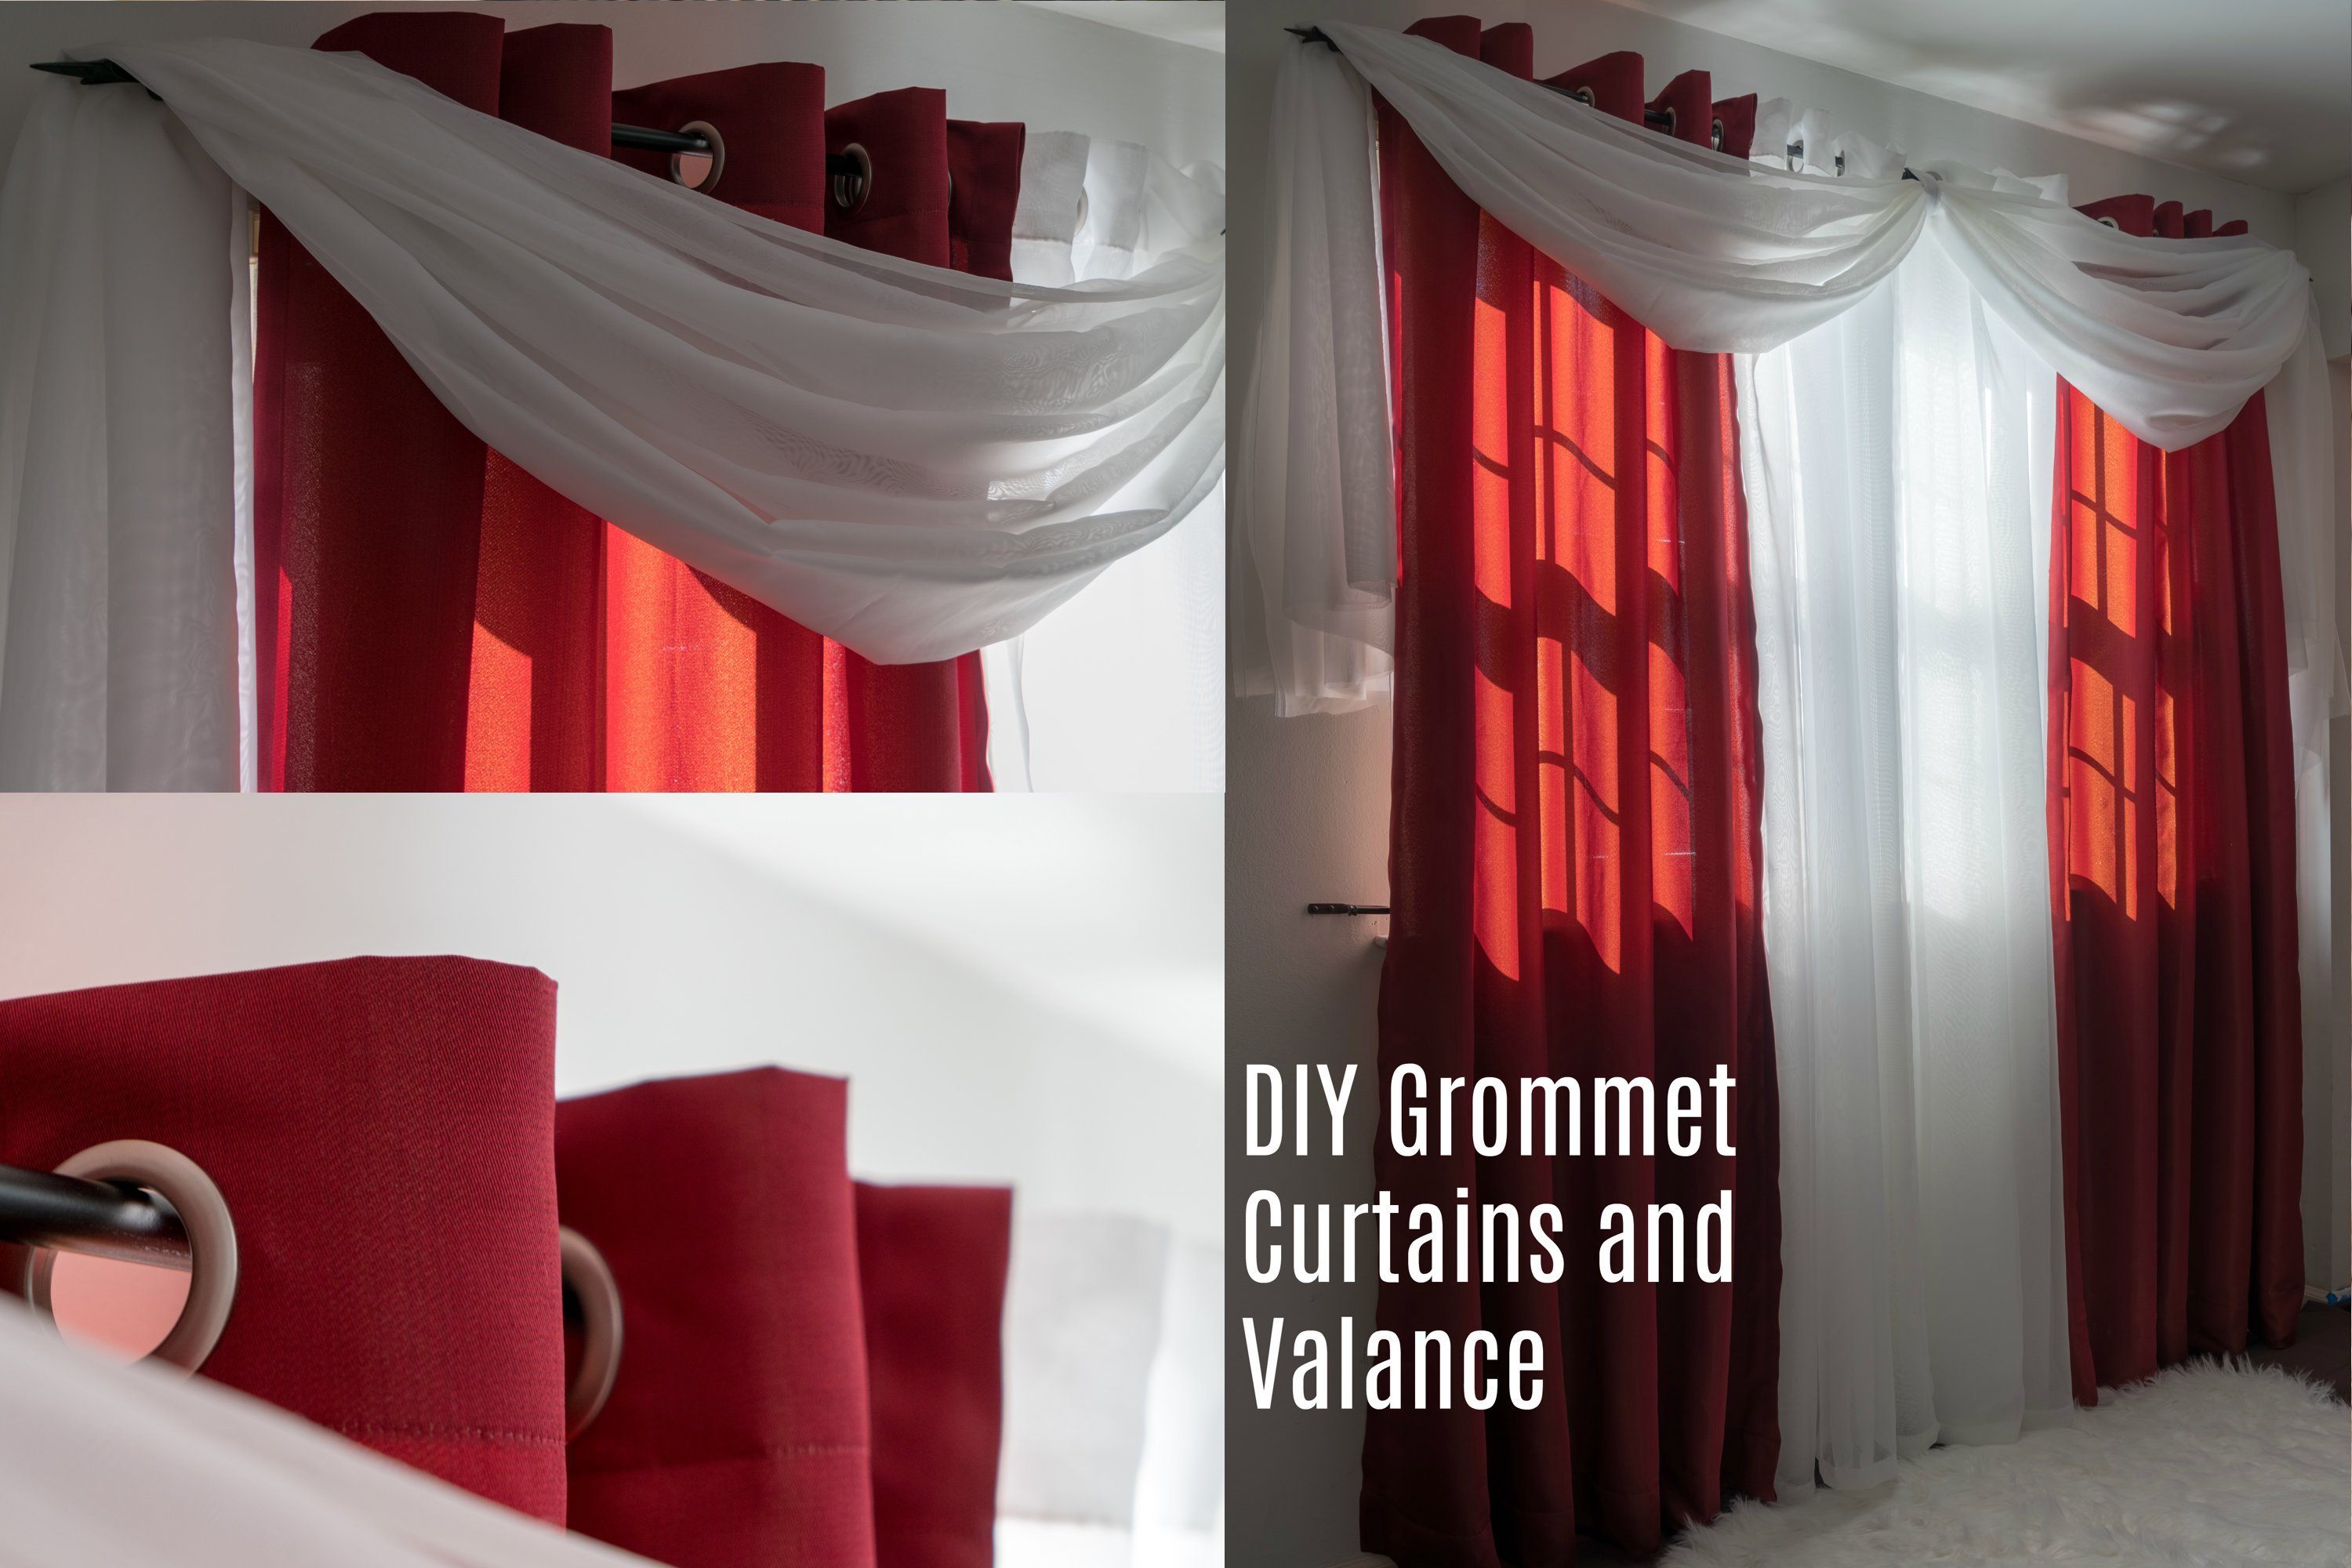 DIY Lined Grommet Top Curtain Panels – That's What {Che} Said